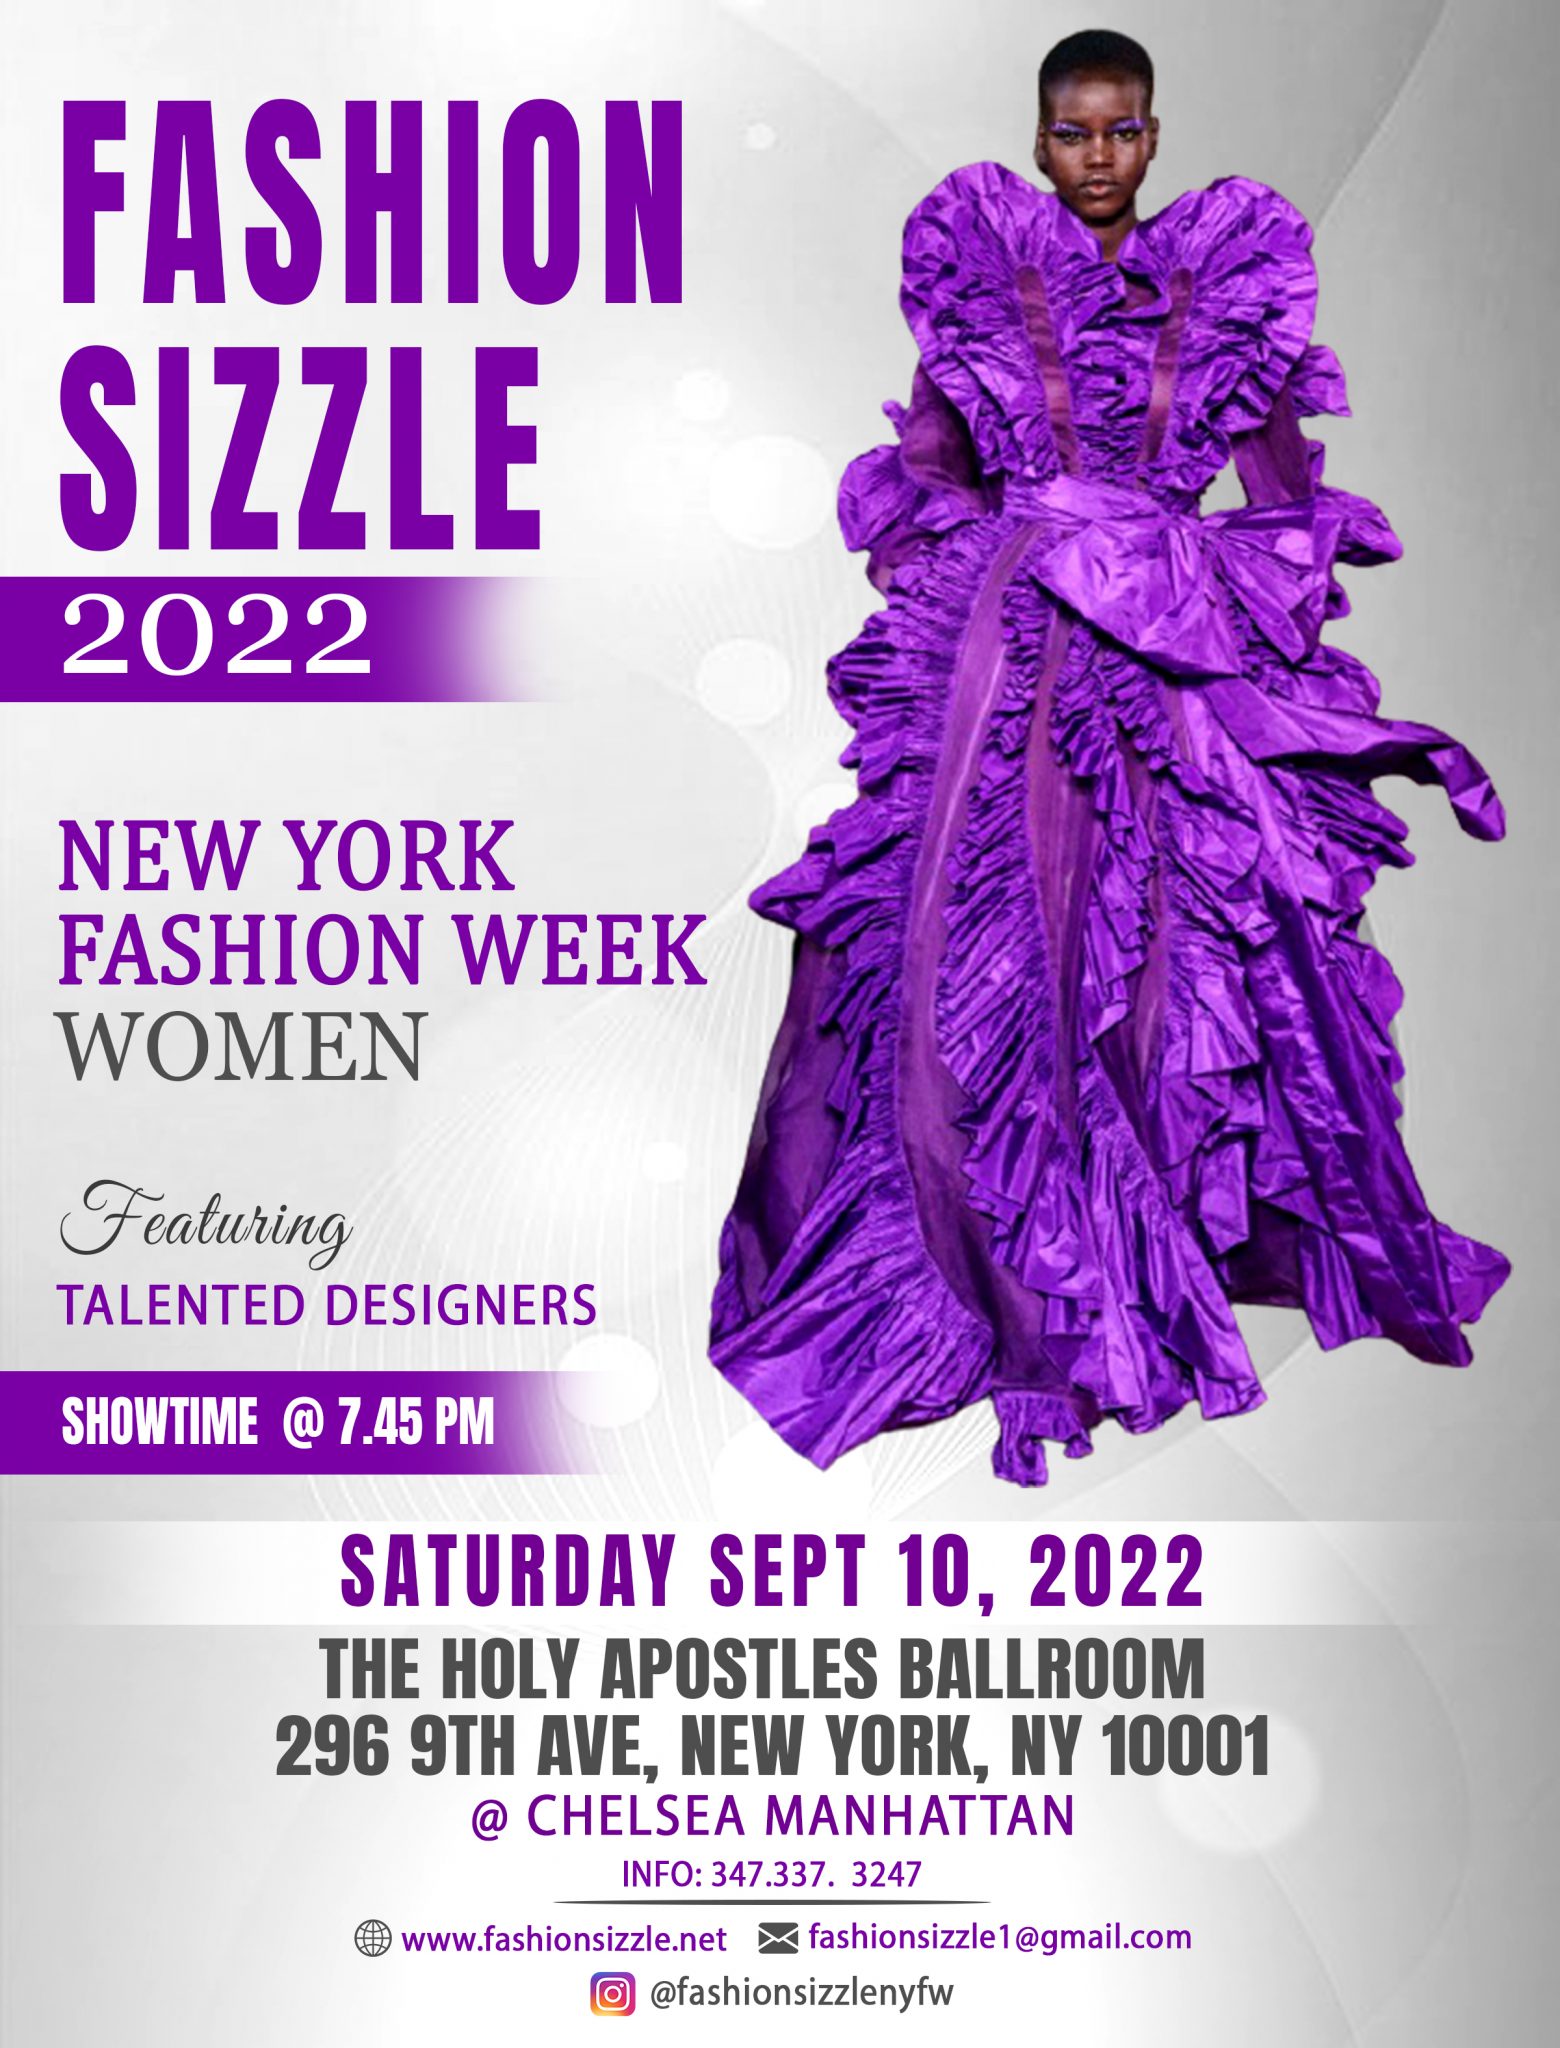 Boutique New York Fashion Week Presented By Fashion Sizzle September 10, 2022